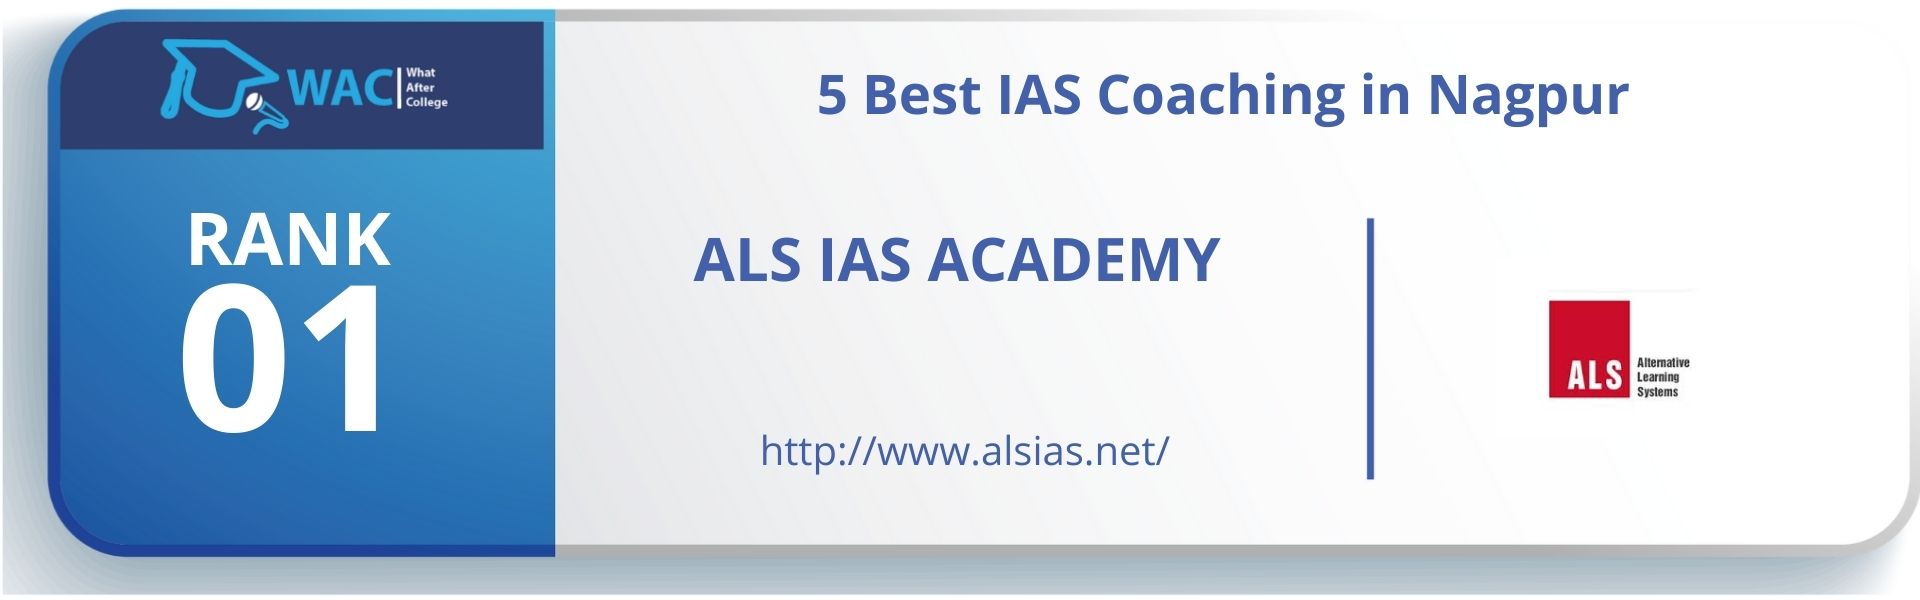 5 Best IAS Coaching in Kanpur Rank 1: ALS IAS Academy in Nagpur